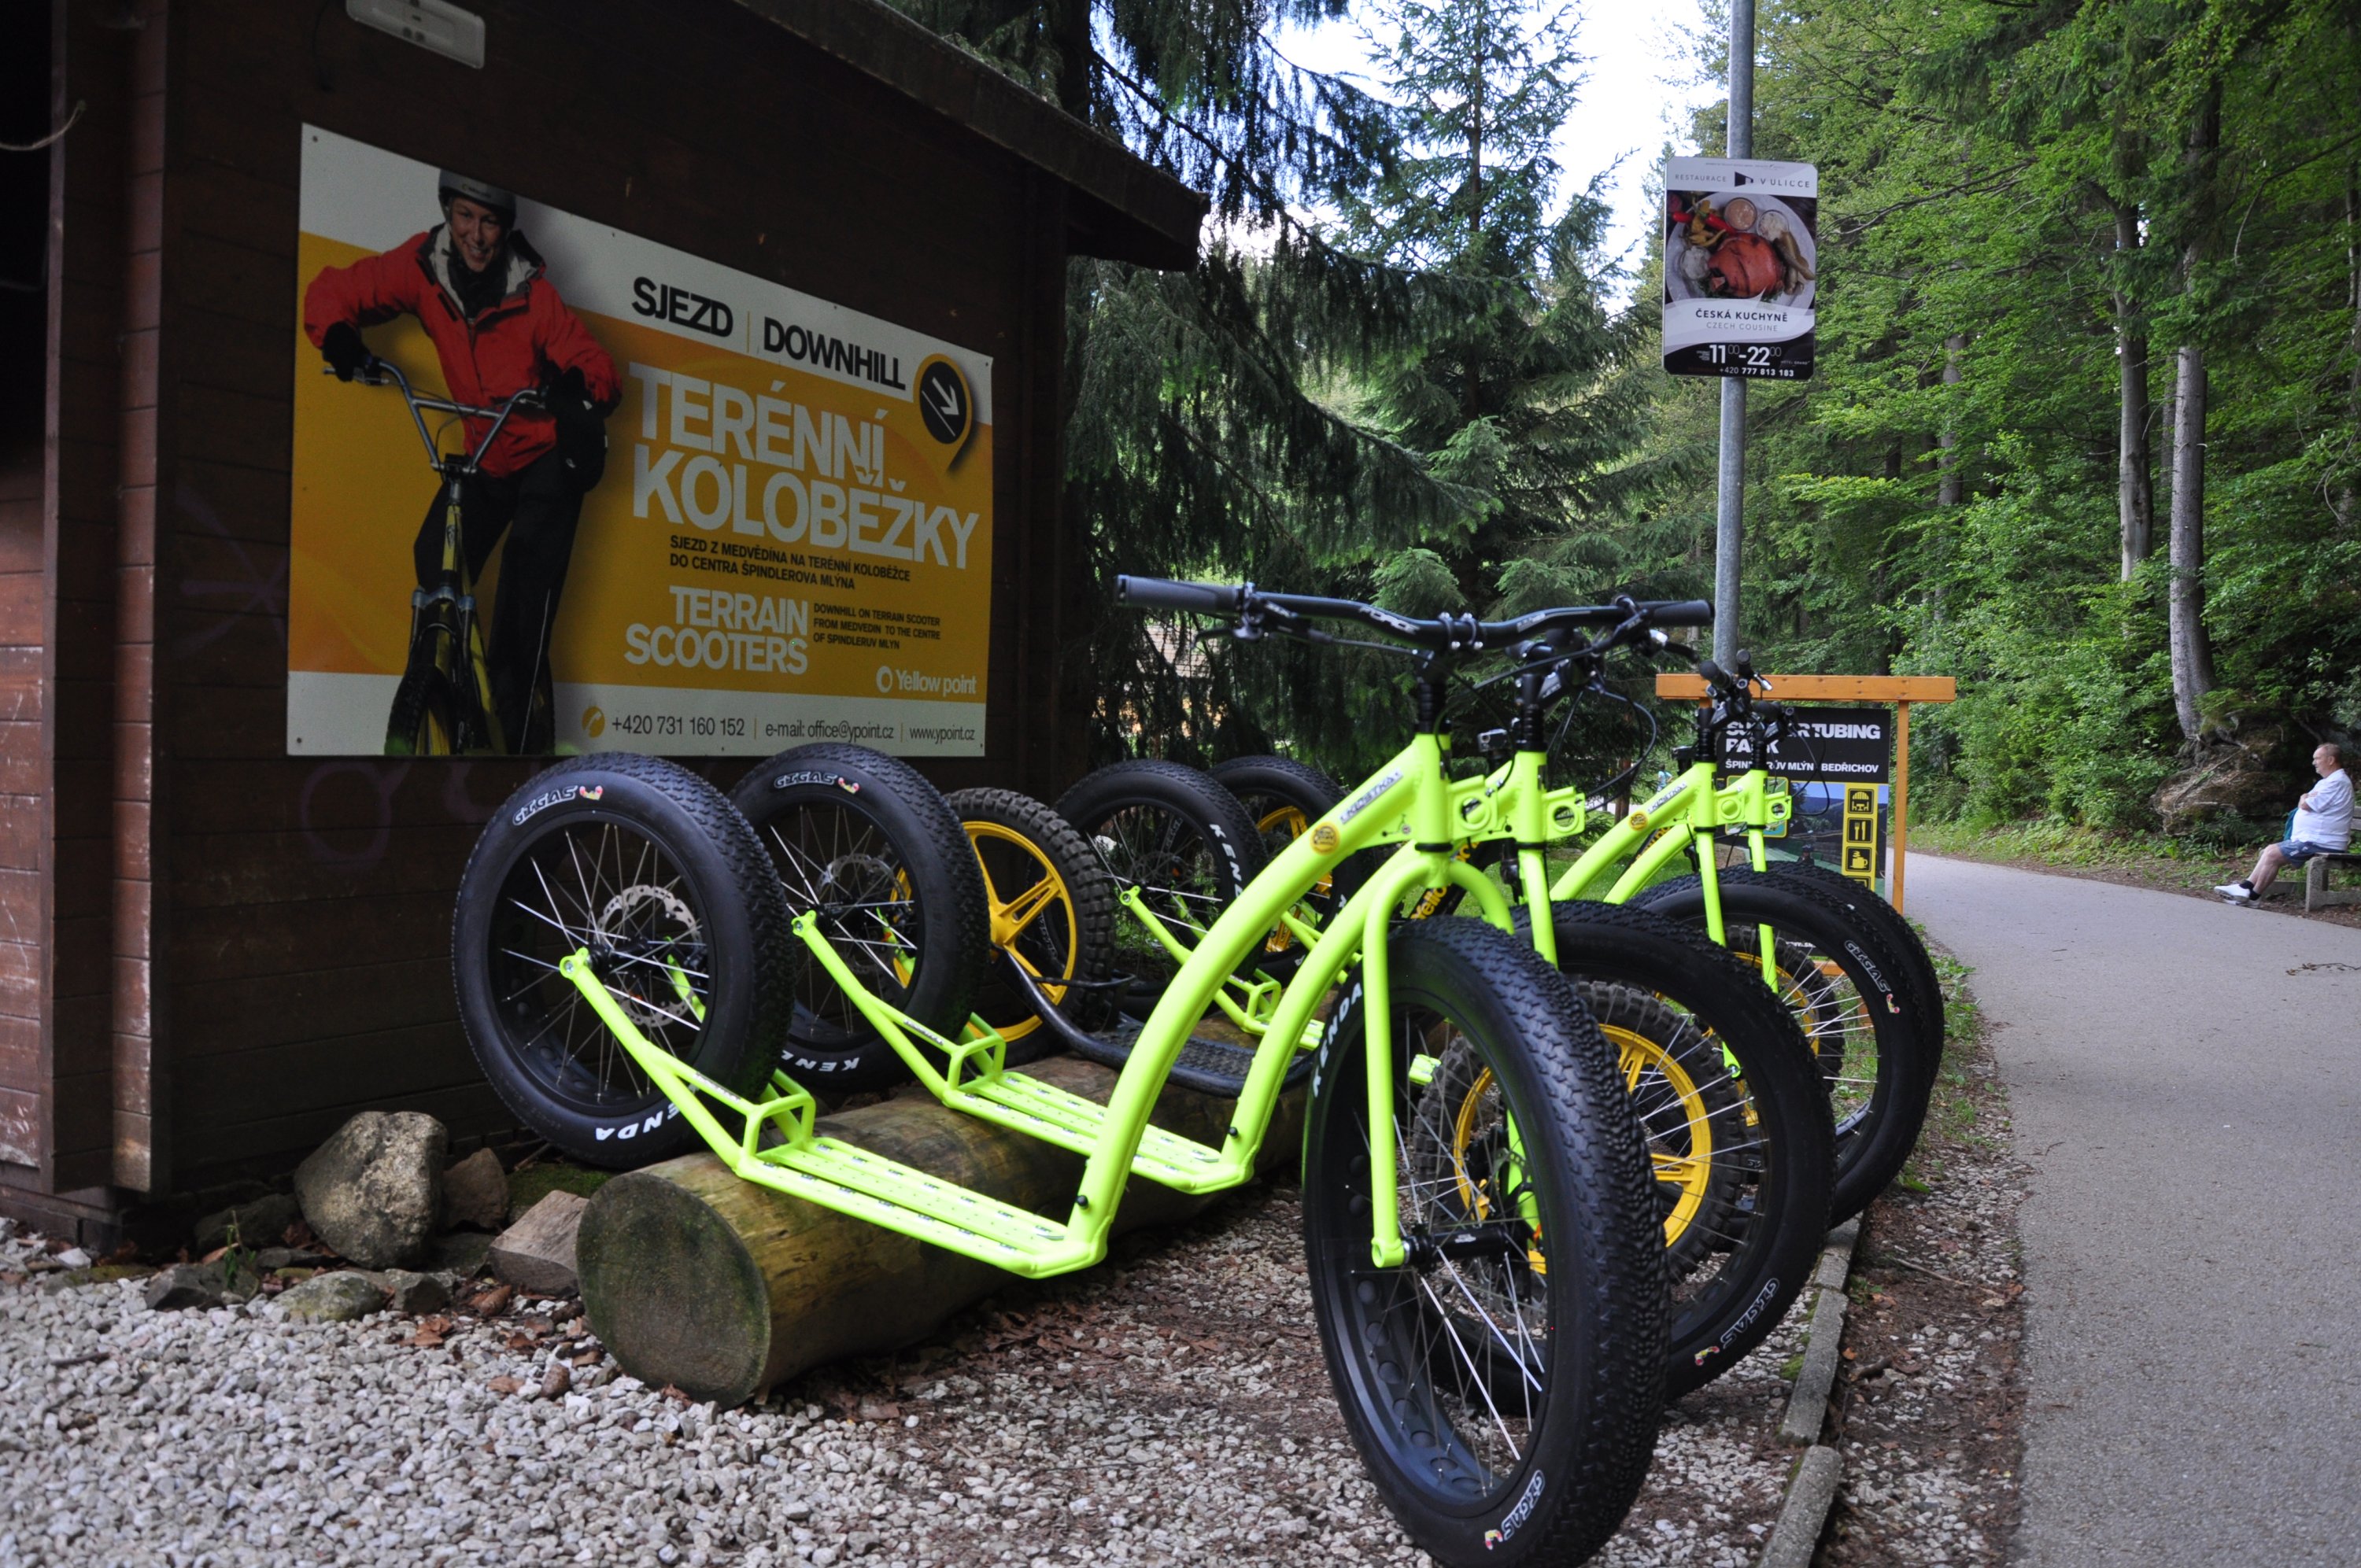 Gule punkt off-road scootere